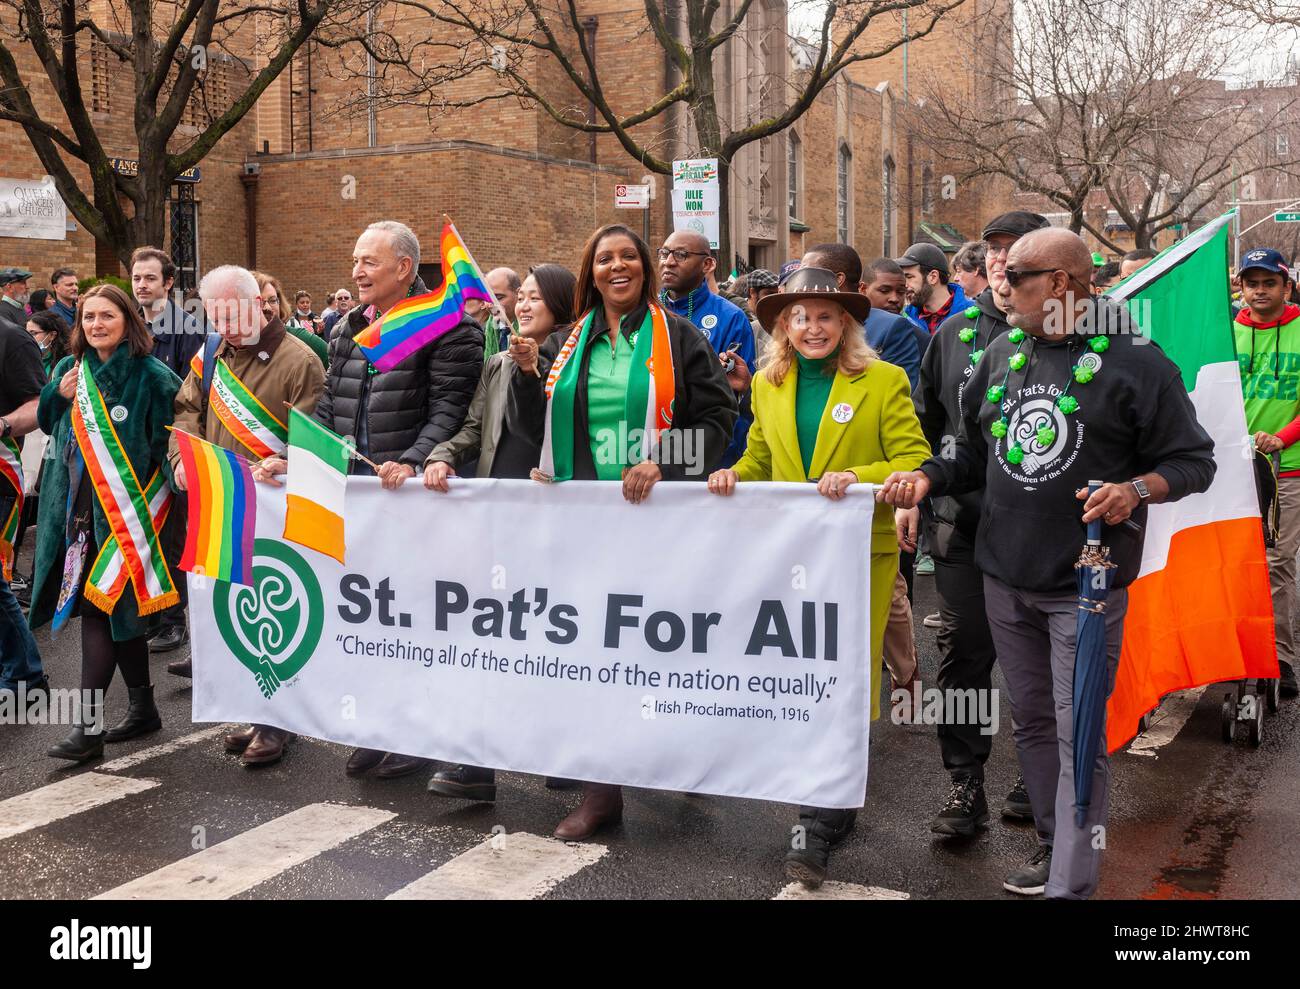 Politicians, including NY Senator Charles Schumer, left, Congresswoman Carolyn Maloney, right, and NY Attorney General Leticia James, center, in the Sunnyside, Queens St. Pat’s For All, St. Patrick's Parade in New York on Sunday, March 6, 2022.  With the lifting of pandemic sanctions outdoor activities, such as New York’s myriad collection of Sunday parades, are back. (© Richard B. Levine) Stock Photo